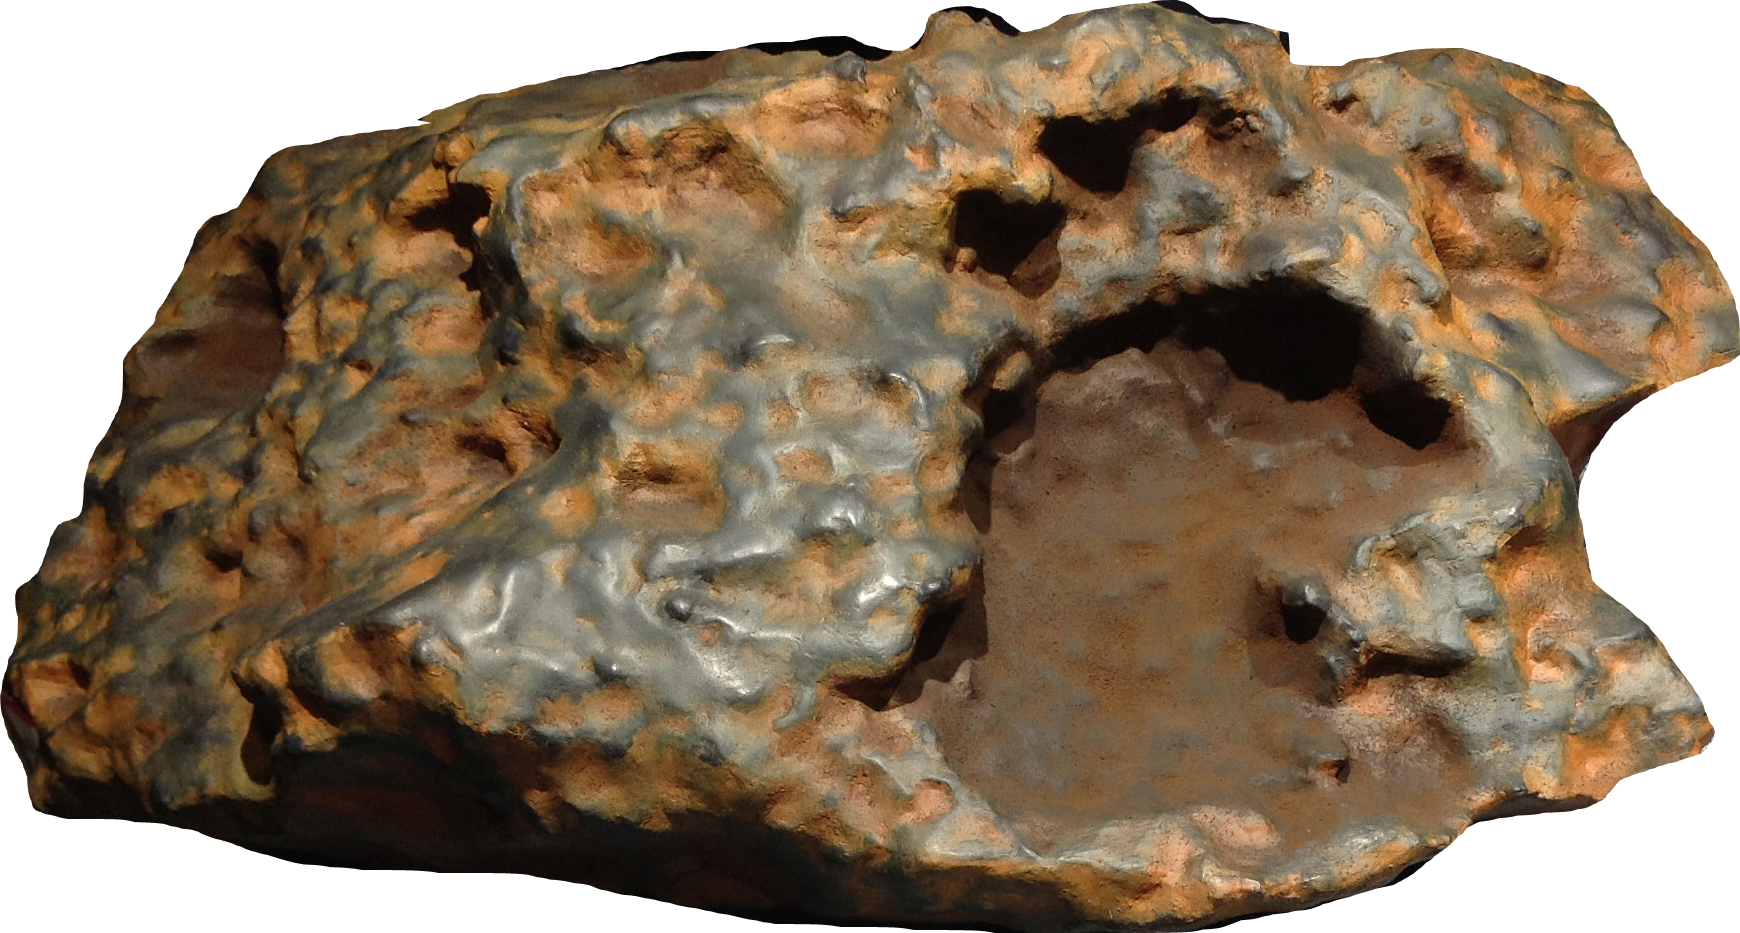 Download 3D Print File for 'Block Island' Meteorite. This is a color image of the 3D model of the Block Island meteorite, which is about the size of a microwave oven. The meteorite is oddly shaped and is a dark brown color with some touches of dark orange. The right side of the meteorite has a chunk missing and has a darker, smoother surface.